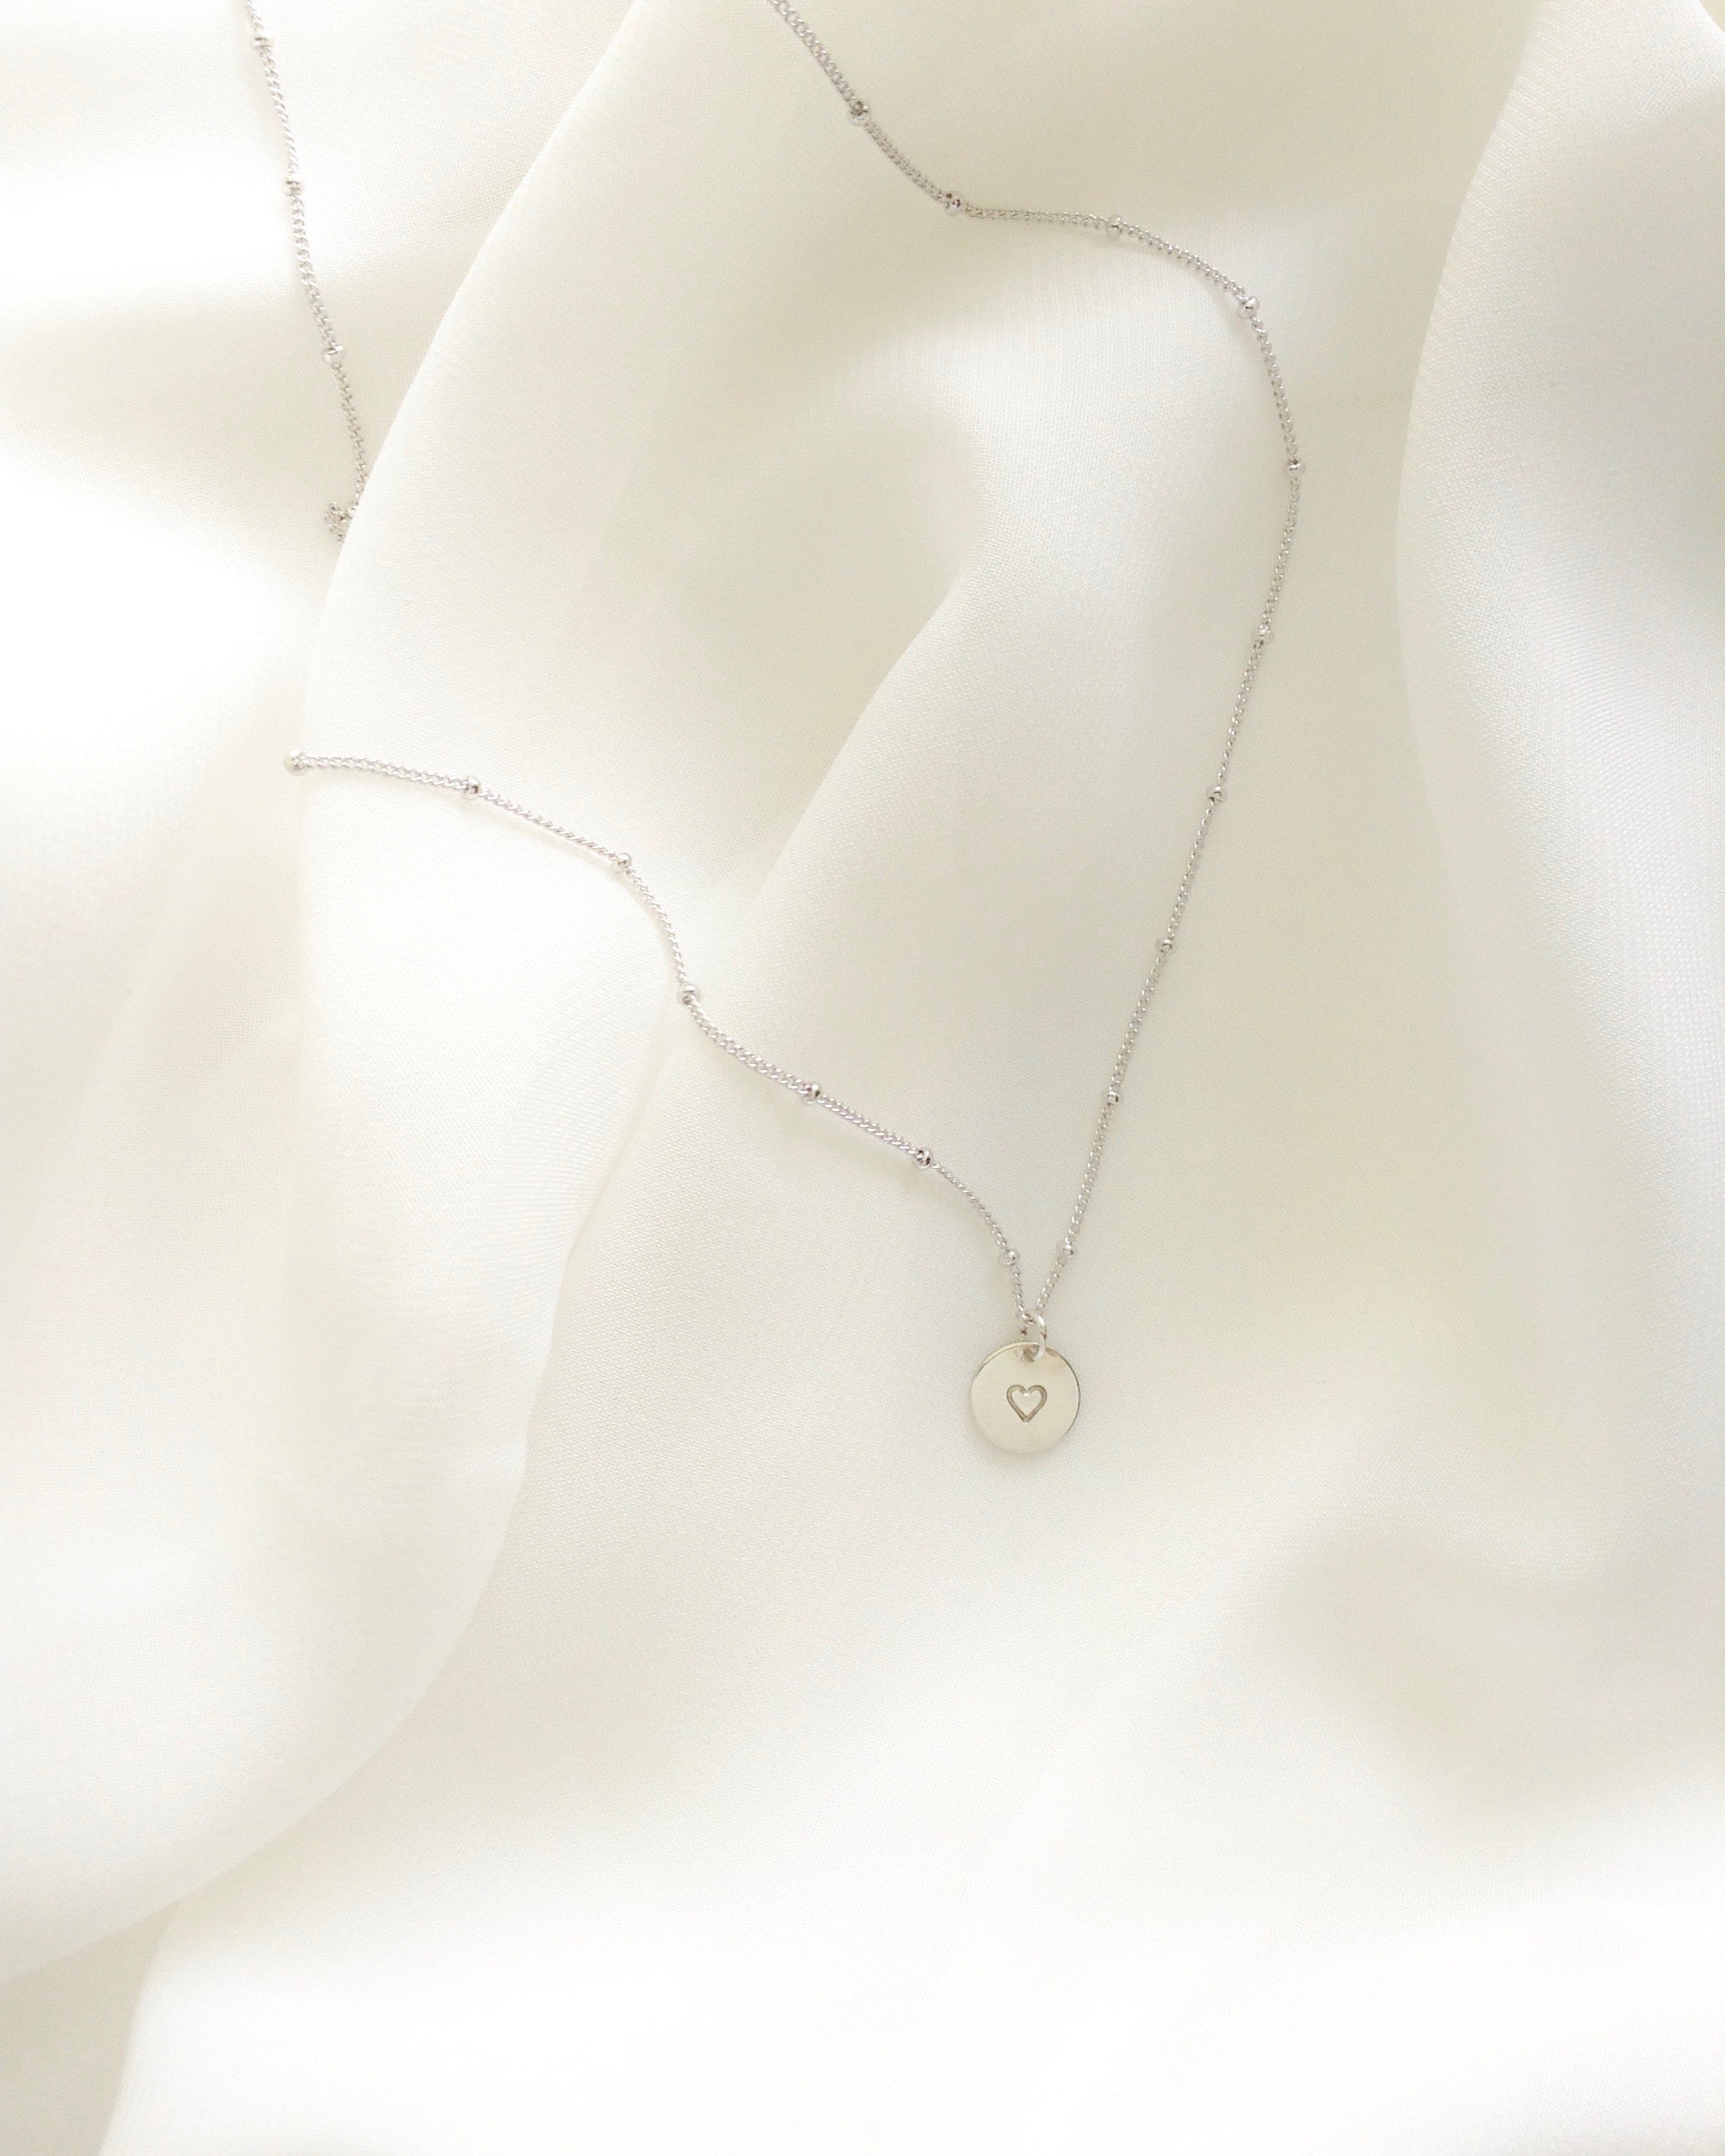 Tiny Heart Meaningful Necklace For Her | IB Jewelry